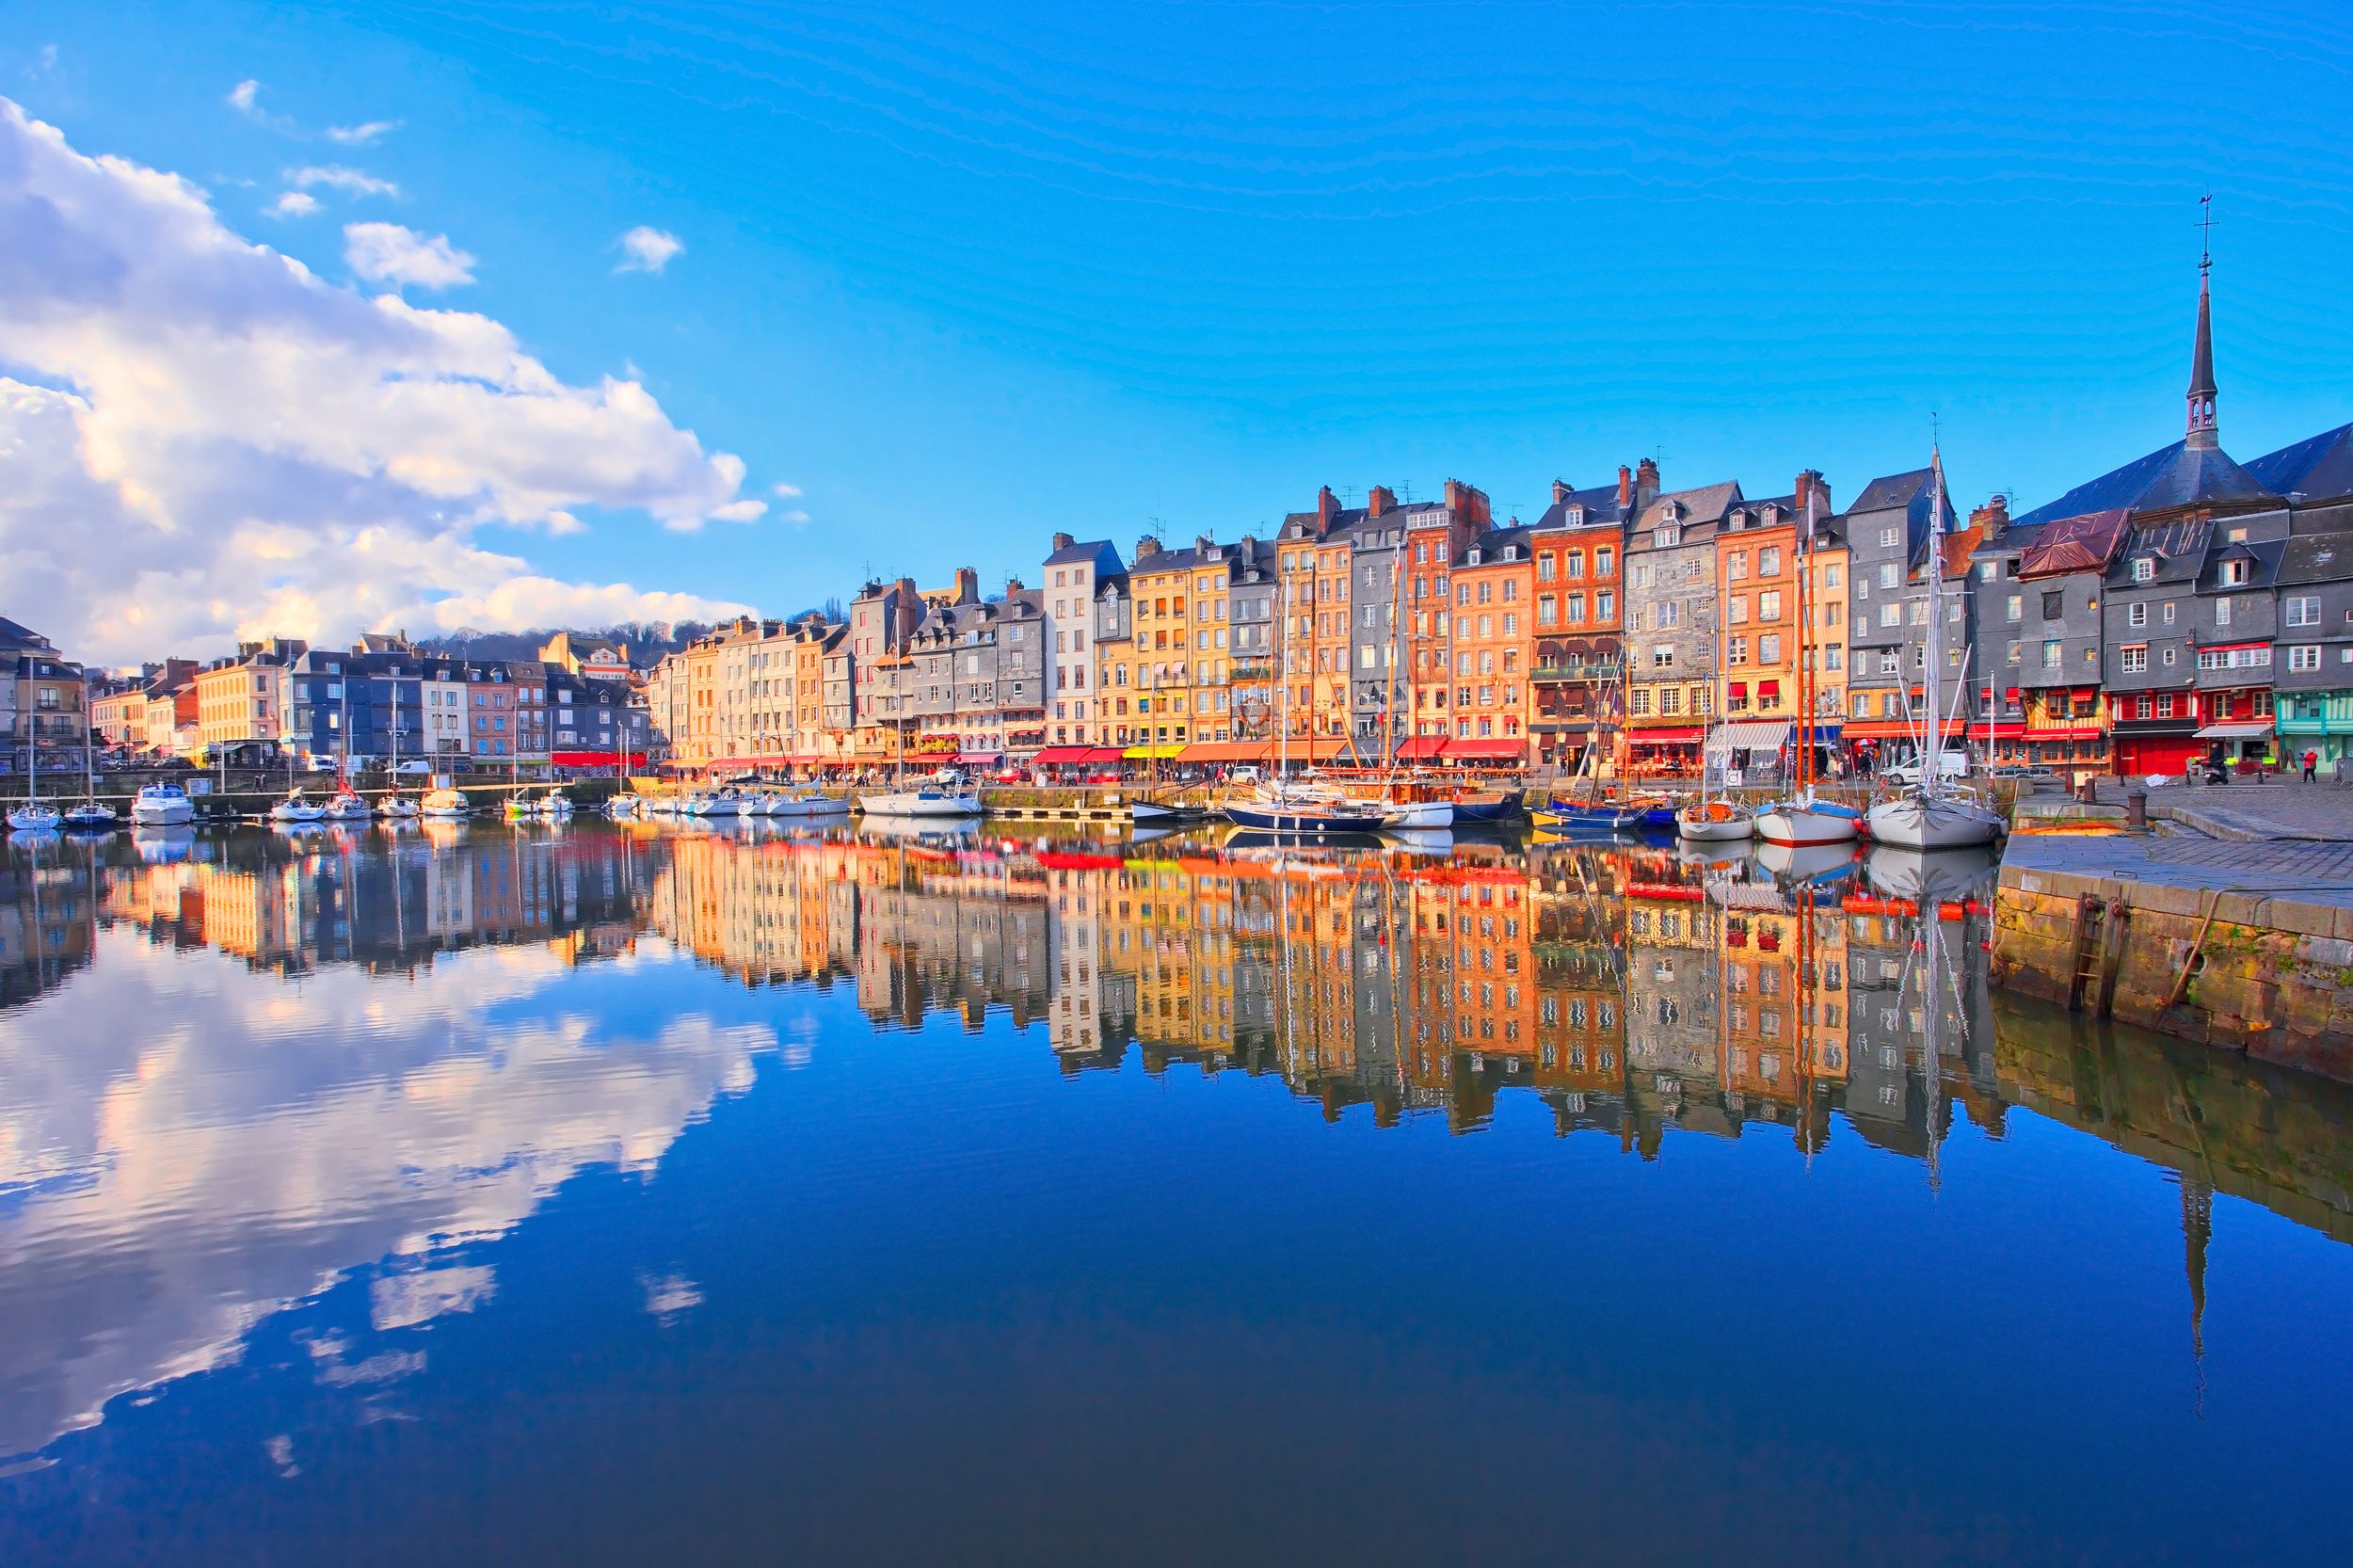 The harbor of Honfleur, Normandy, France, Europe